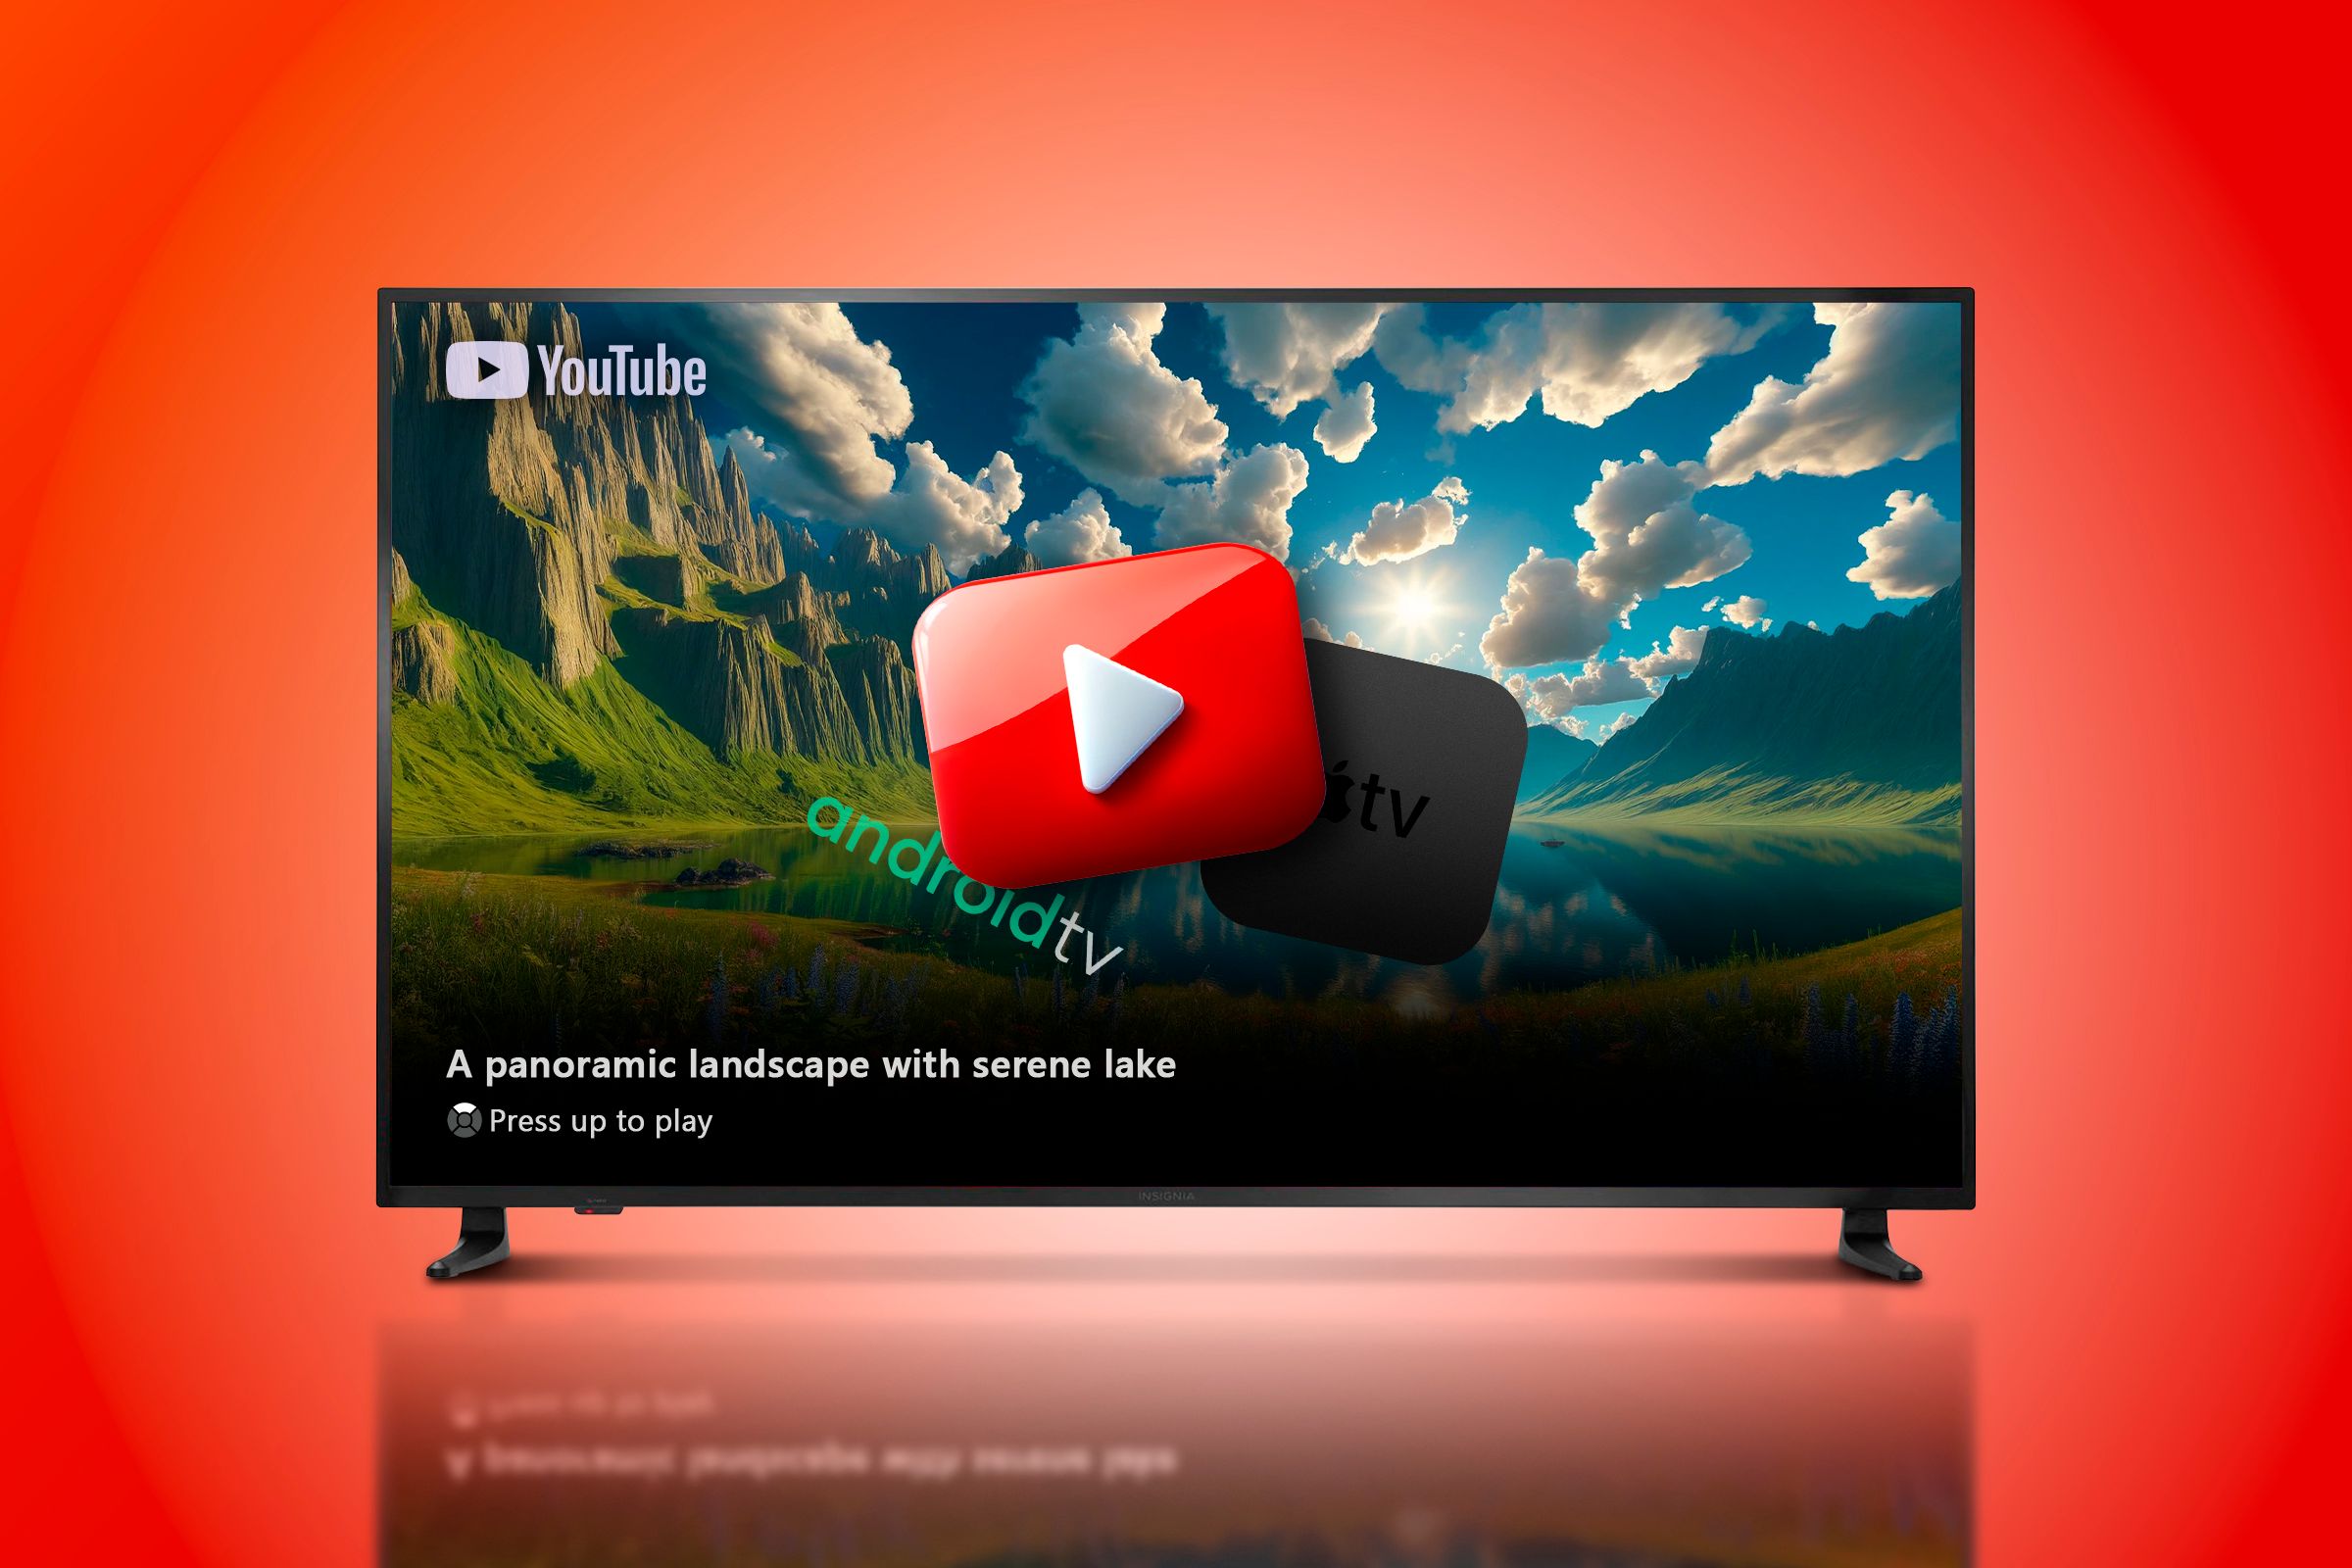 A smart TV set displaying a nature landscape screensaver with the YouTube logo in front of Android TV and Apple TV logos.